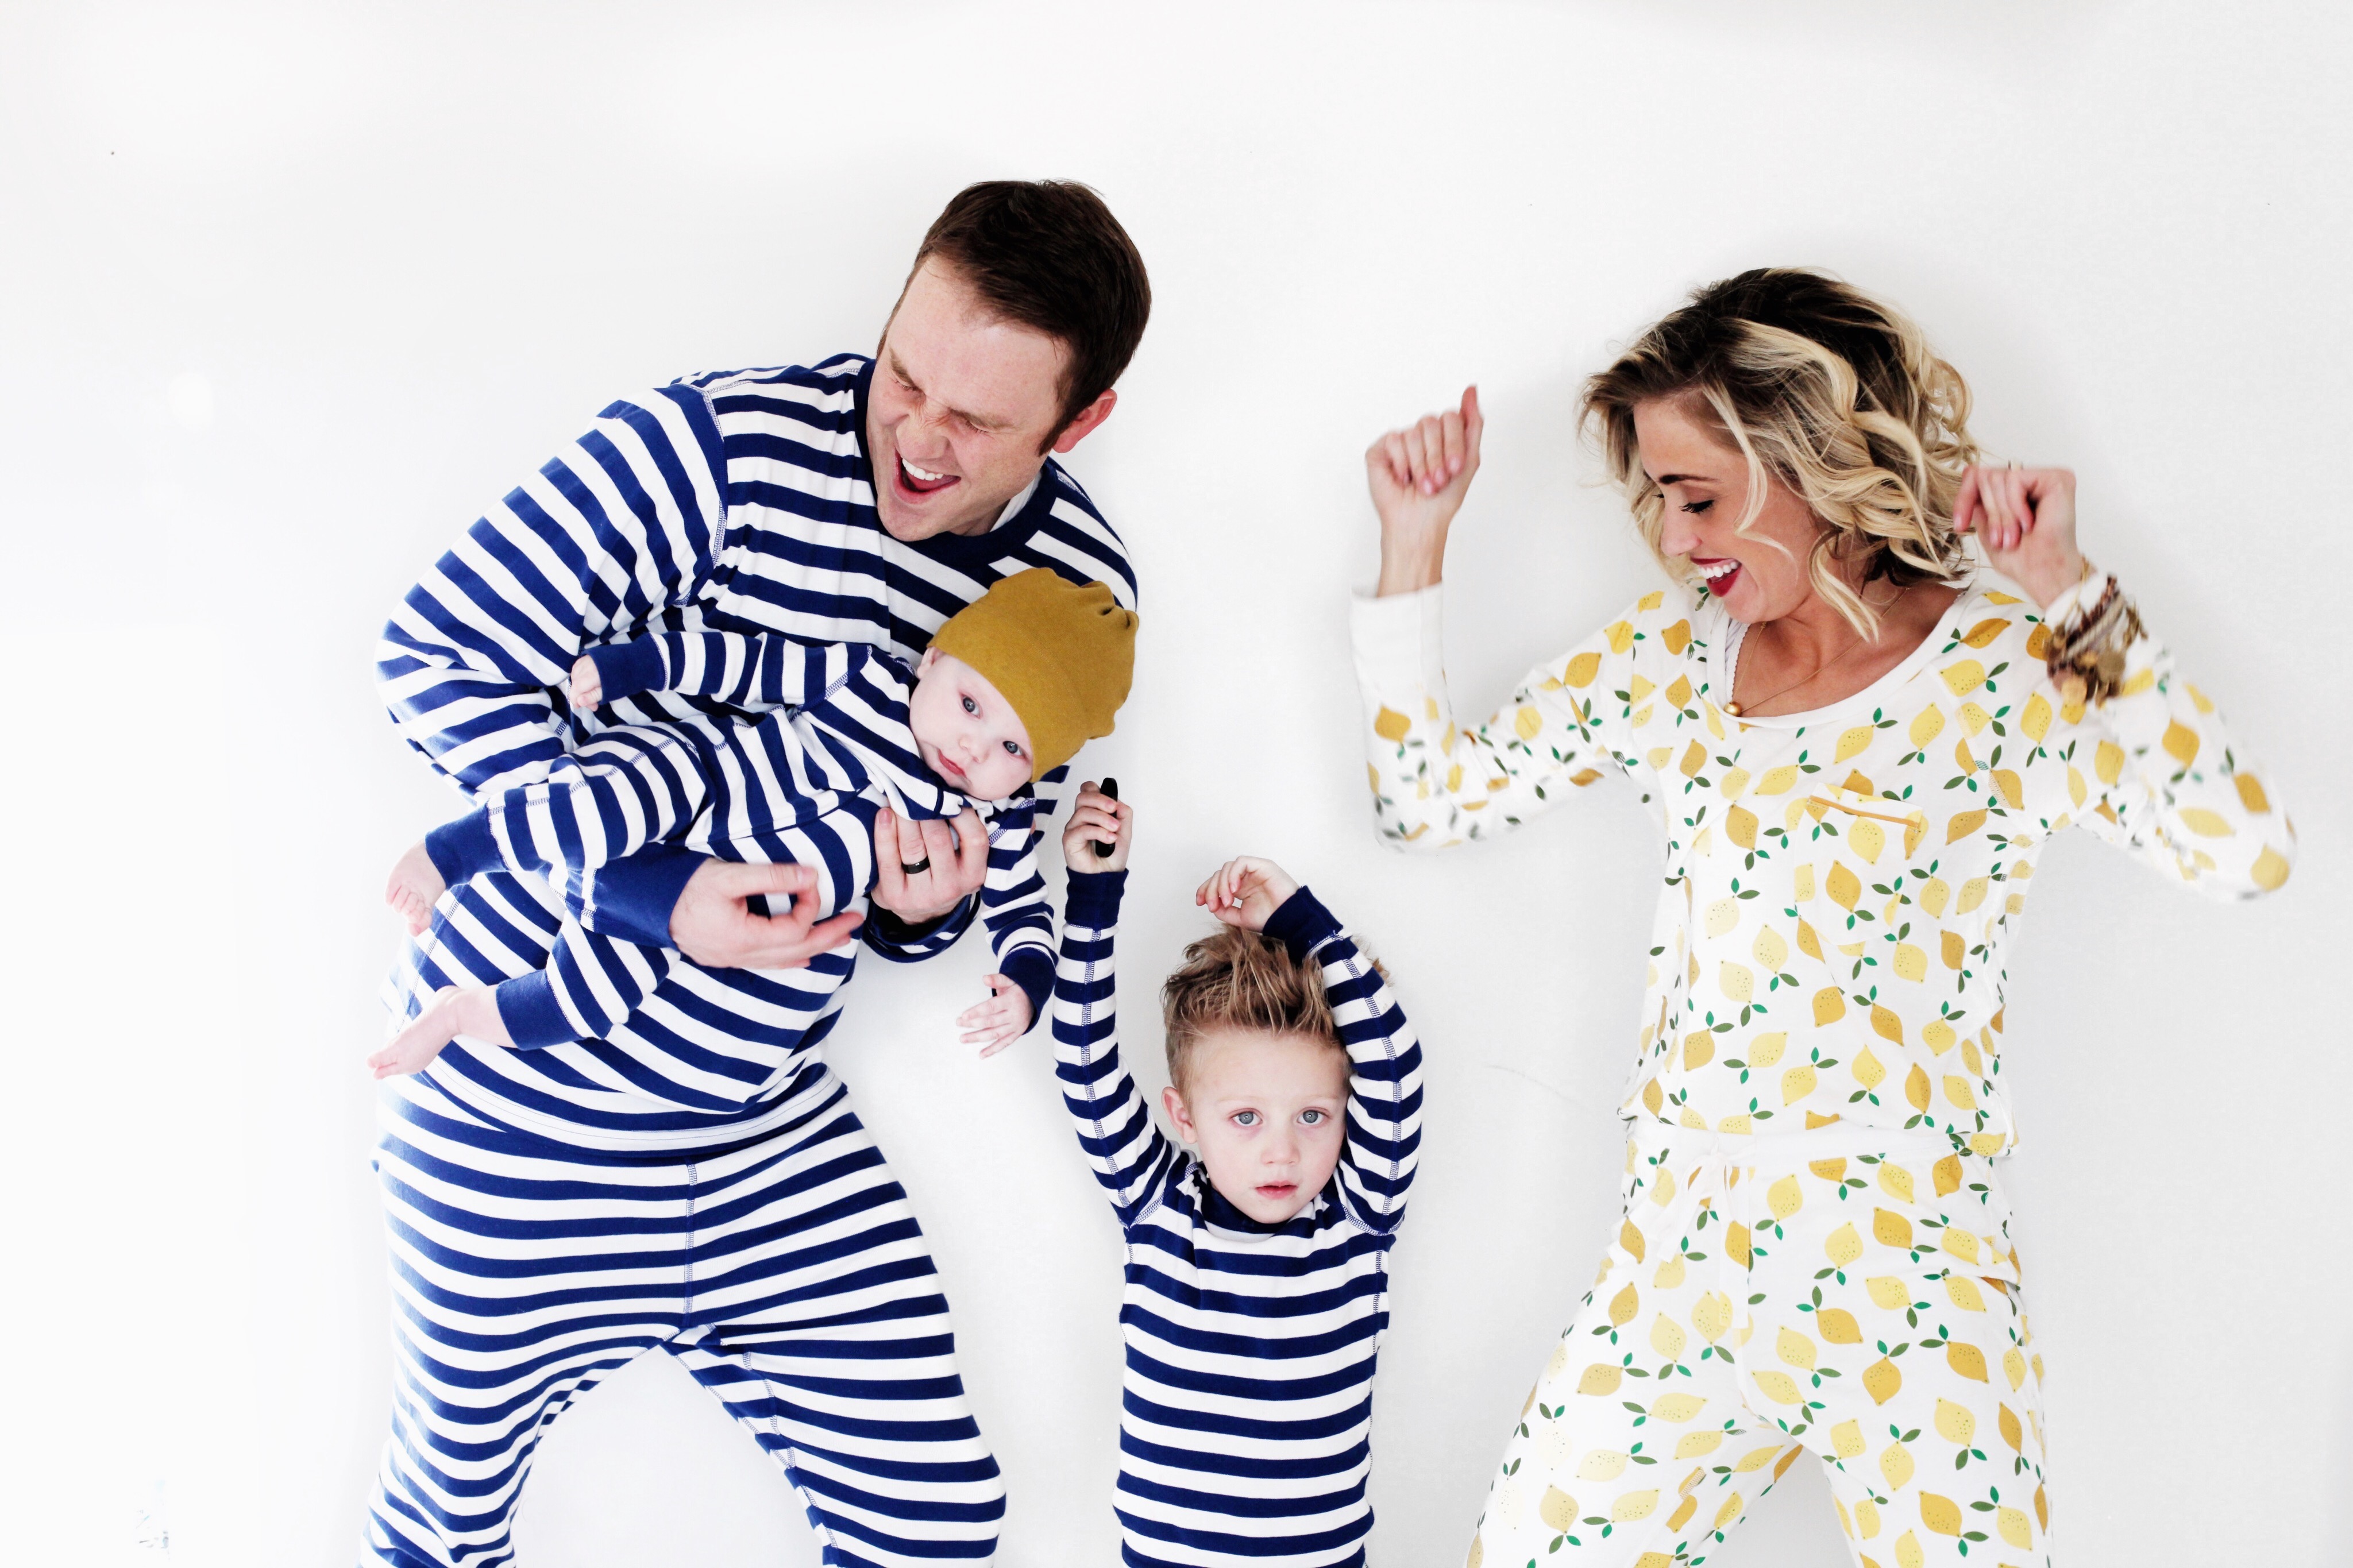 New Jams in our Family Jams: The Coolest Family Pajamas by Ginger Parrish of The Parrish Place